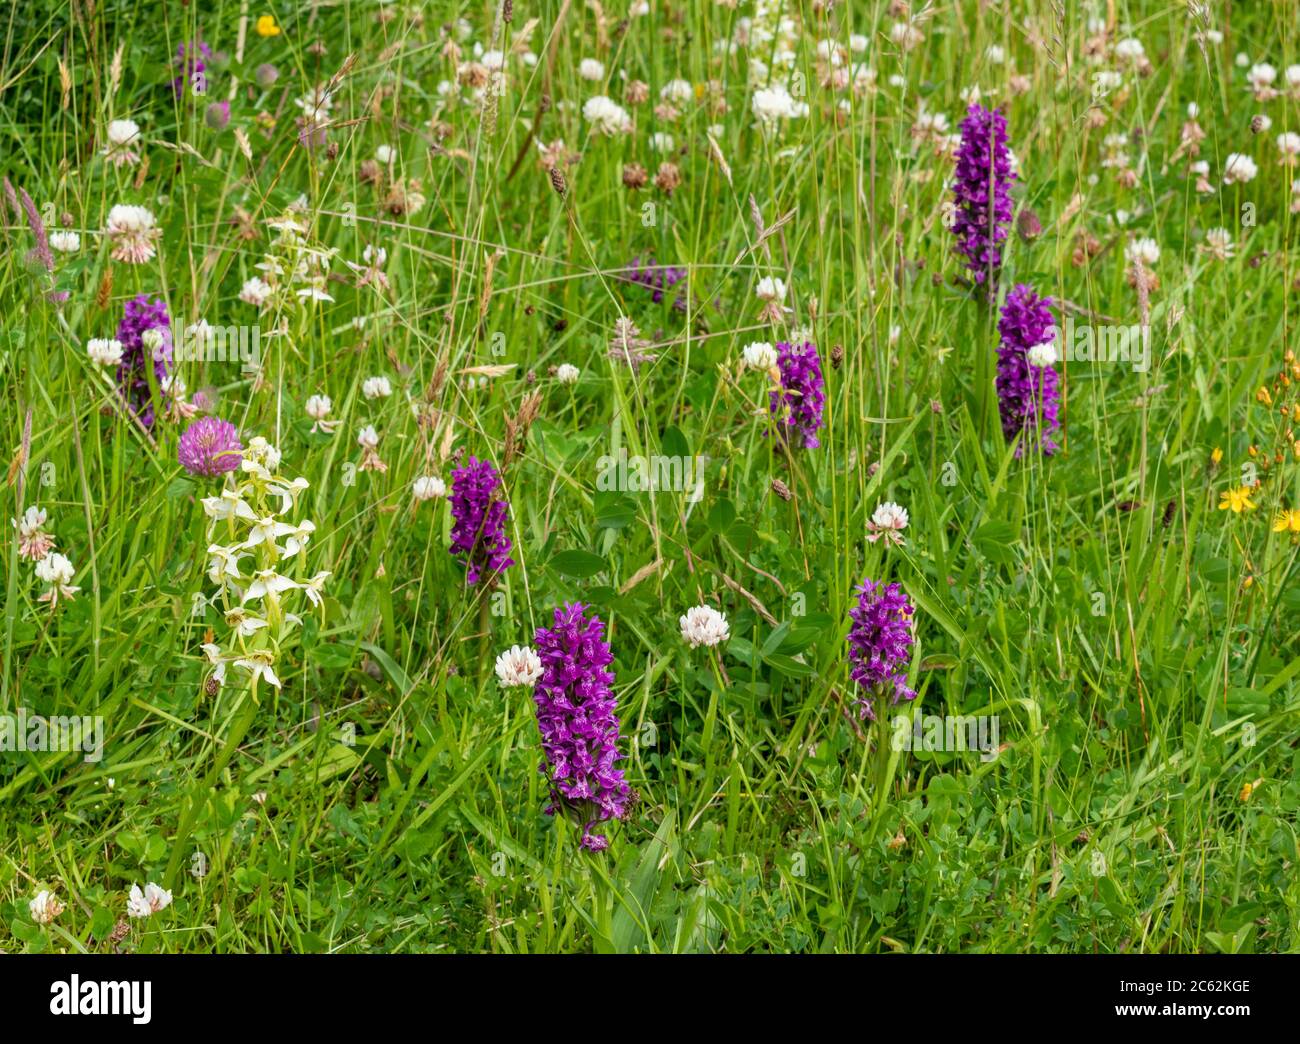 PURPLE NORTHERN MARSH ORCHIDS Dactylorhiza purpurella GROWING ALONGSIDE THE CREAM AND GREEN COLOURED GREATER BUTTERFLY ORCHID Platanthera chlorantha W Stock Photo